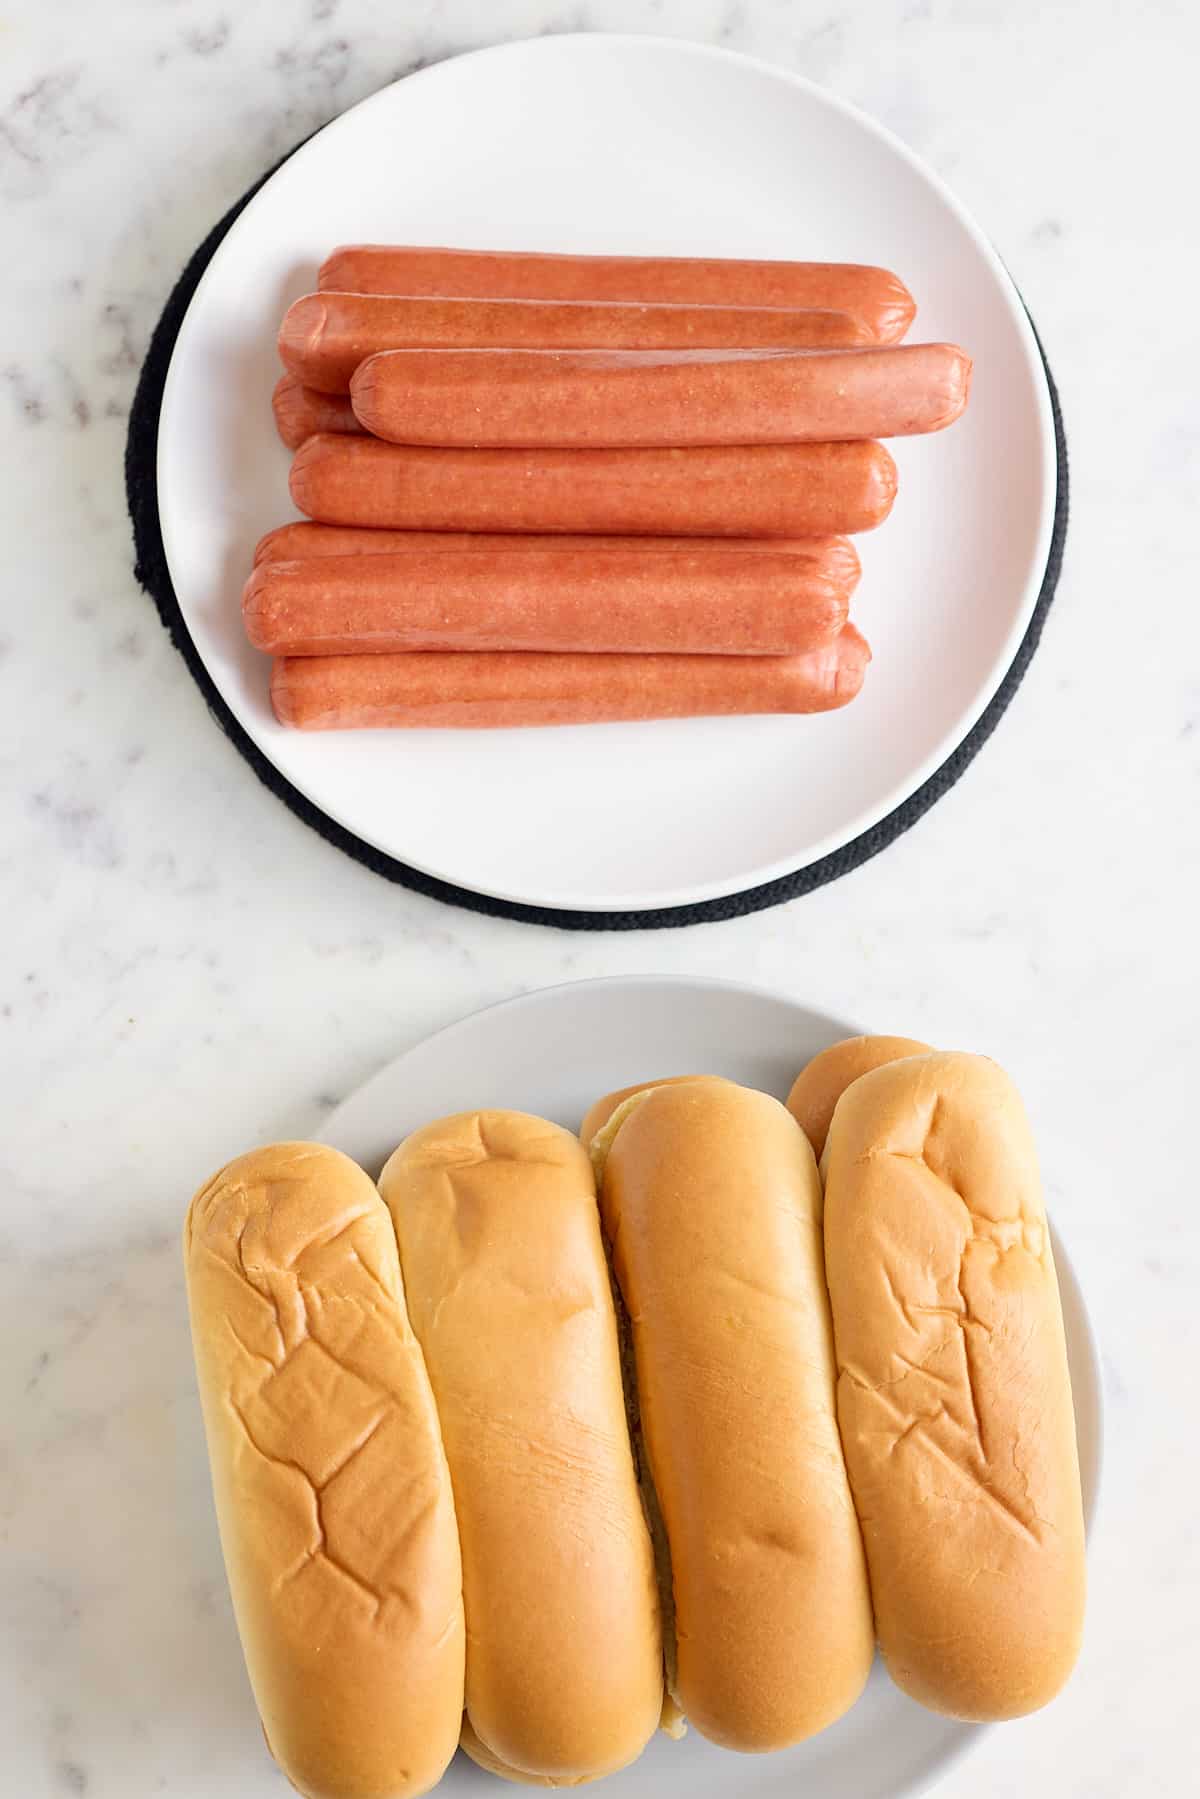 oven baked hot dogs recipe ingredients